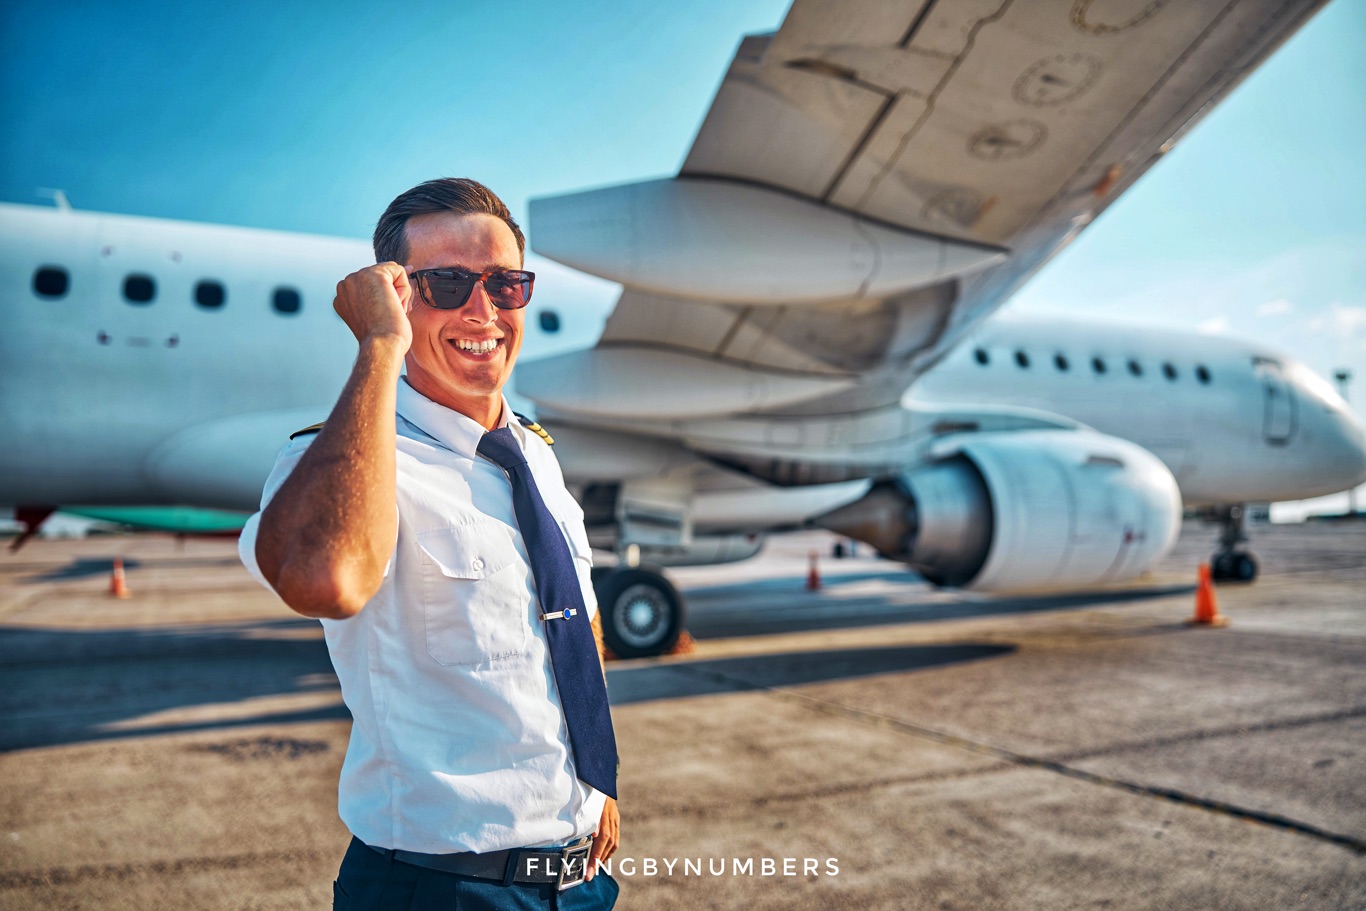 Smiling pilot with sunglasses